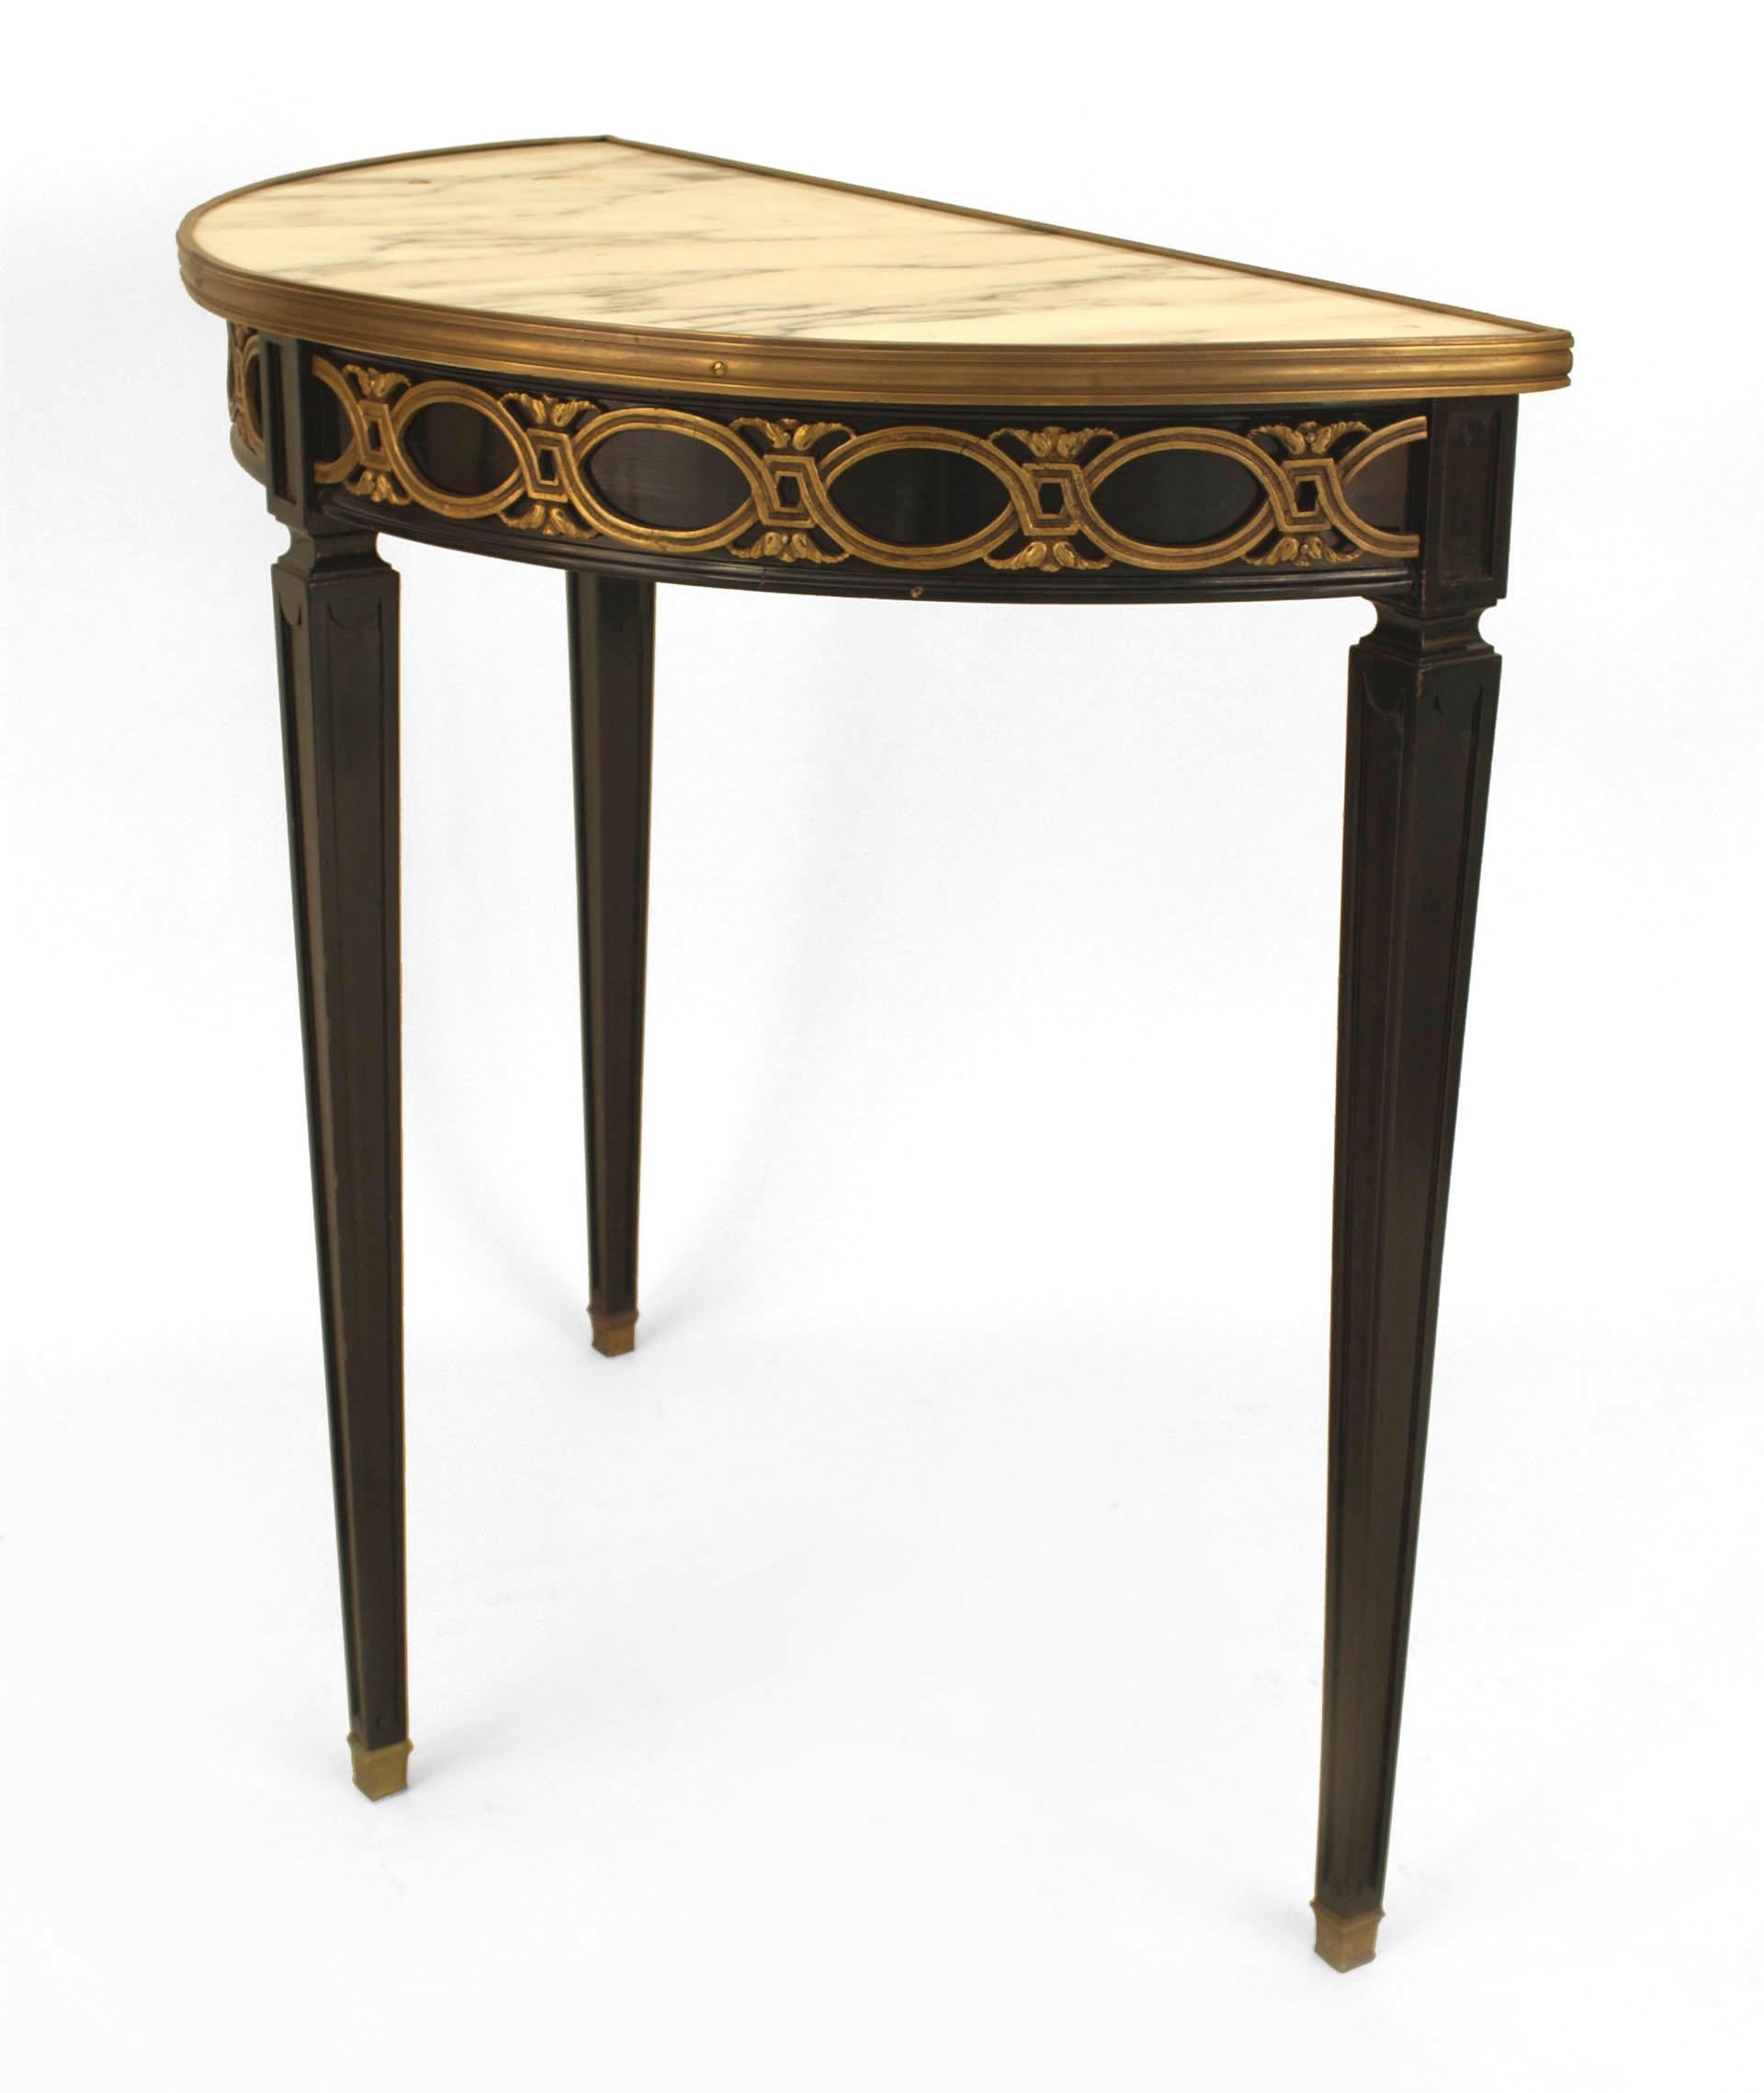 French Louis XVI-style (1940s) ebonized demilune shaped console table with a bronze scroll design apron under an inset white marble top with tapered square legs. (stamped: JANSEN)
